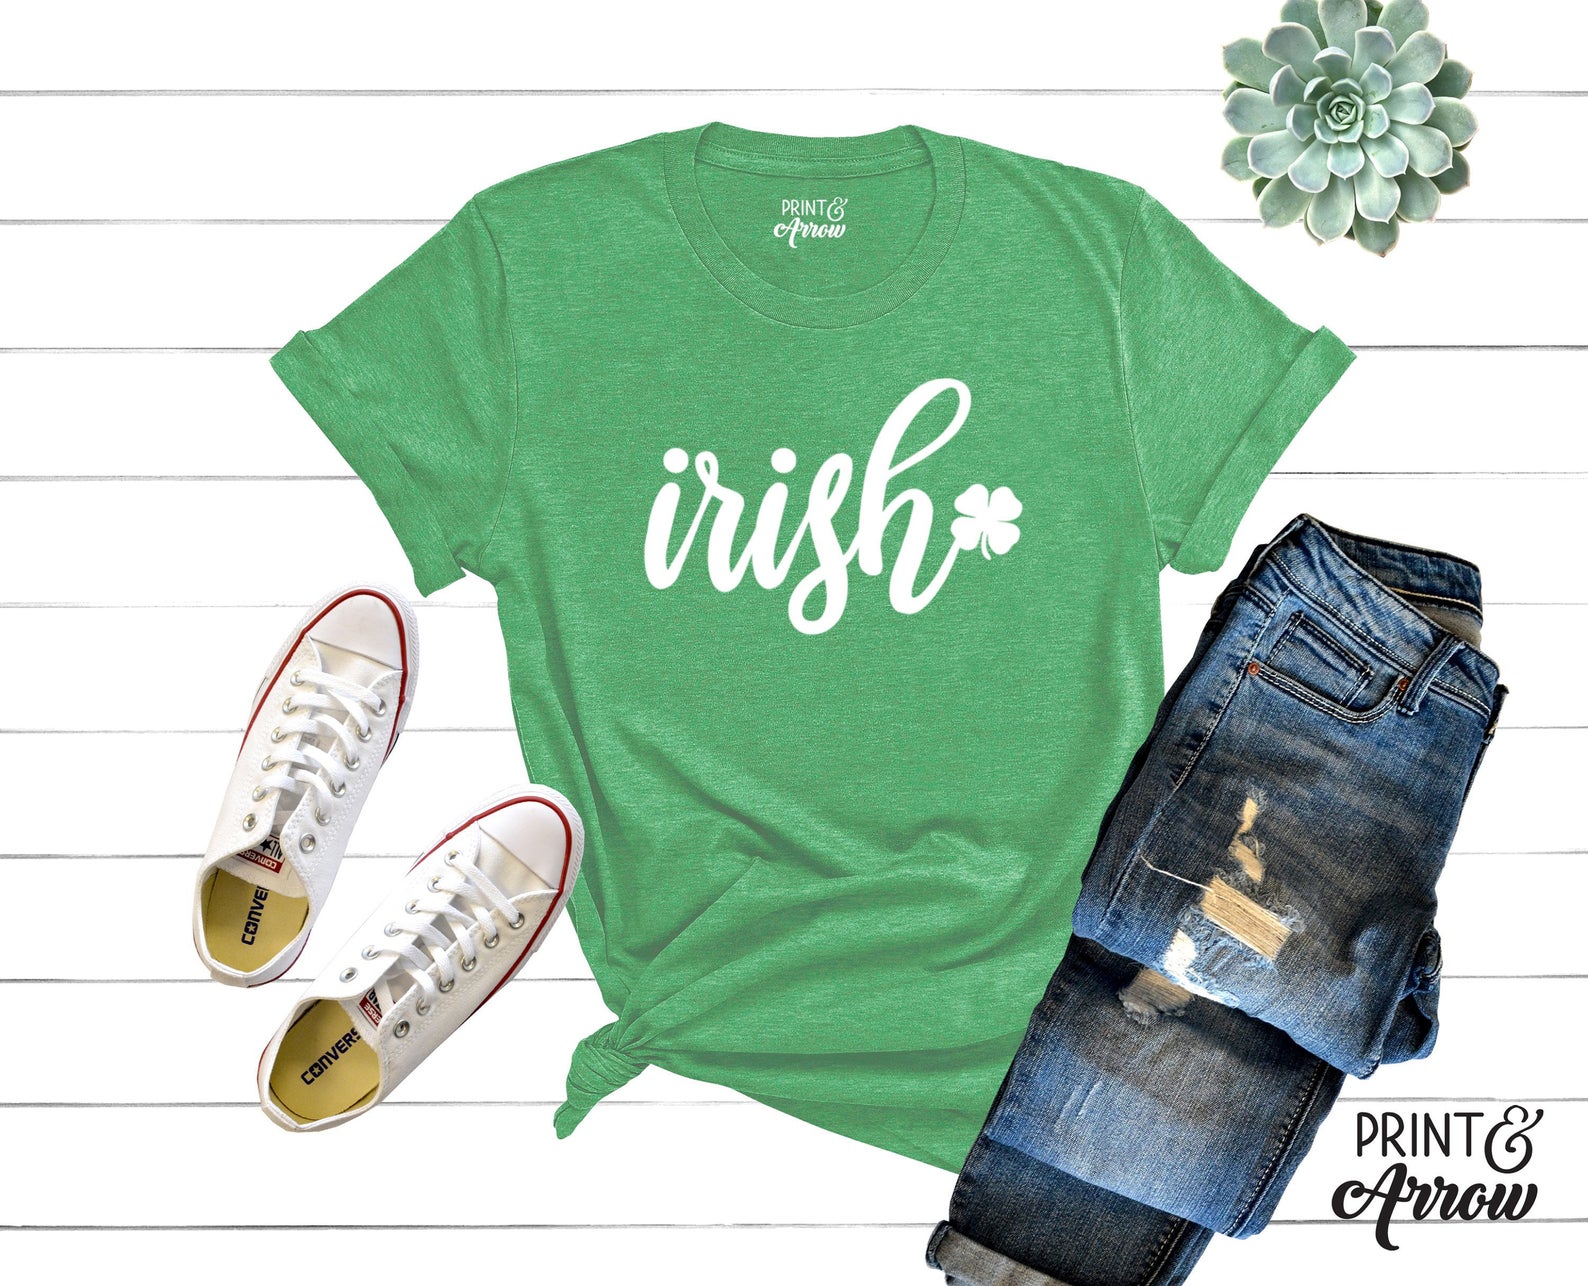 A cute Irish shirt you can find on Etsy!